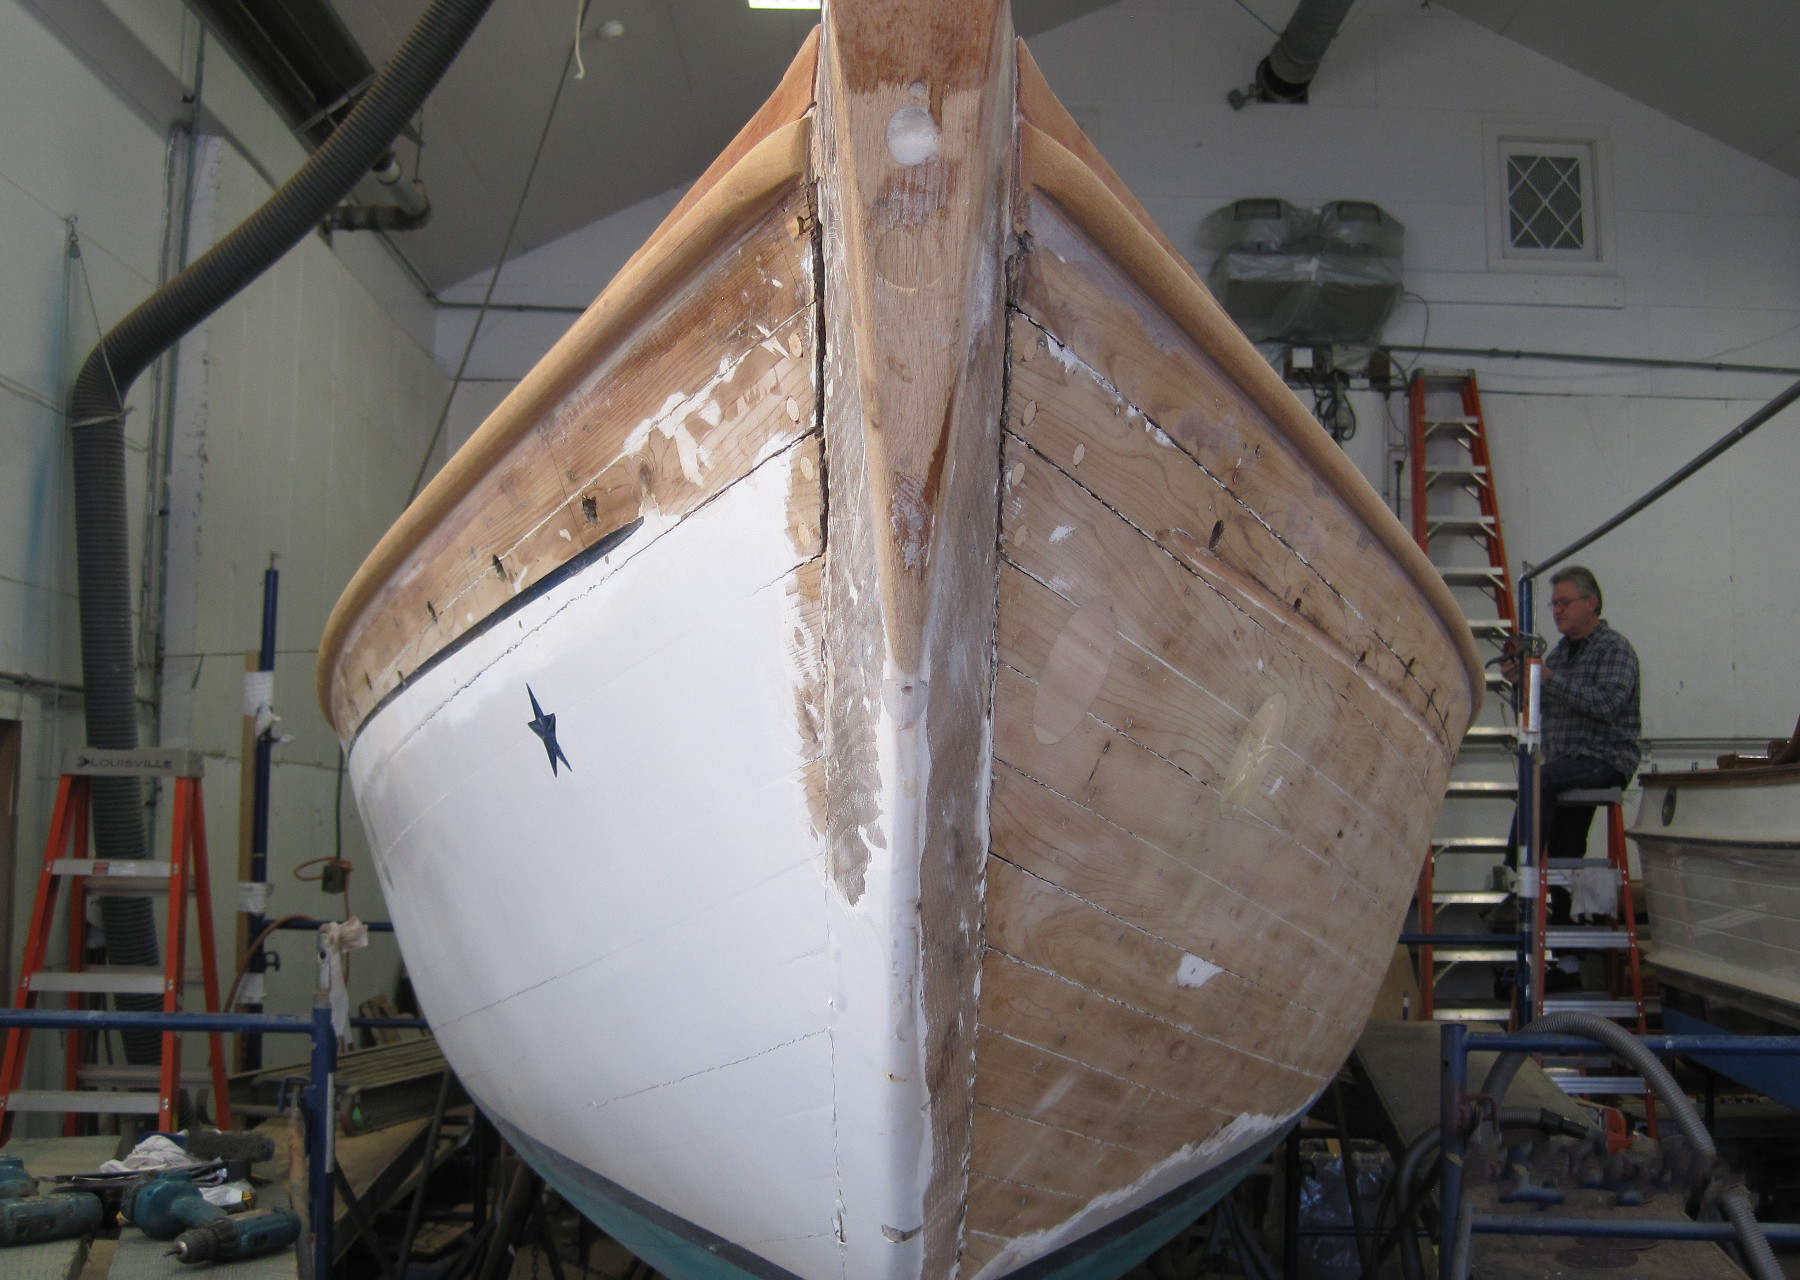 Wooden Boat Restoration - Kestrel - The hull being stripped for refastening and refinishing.